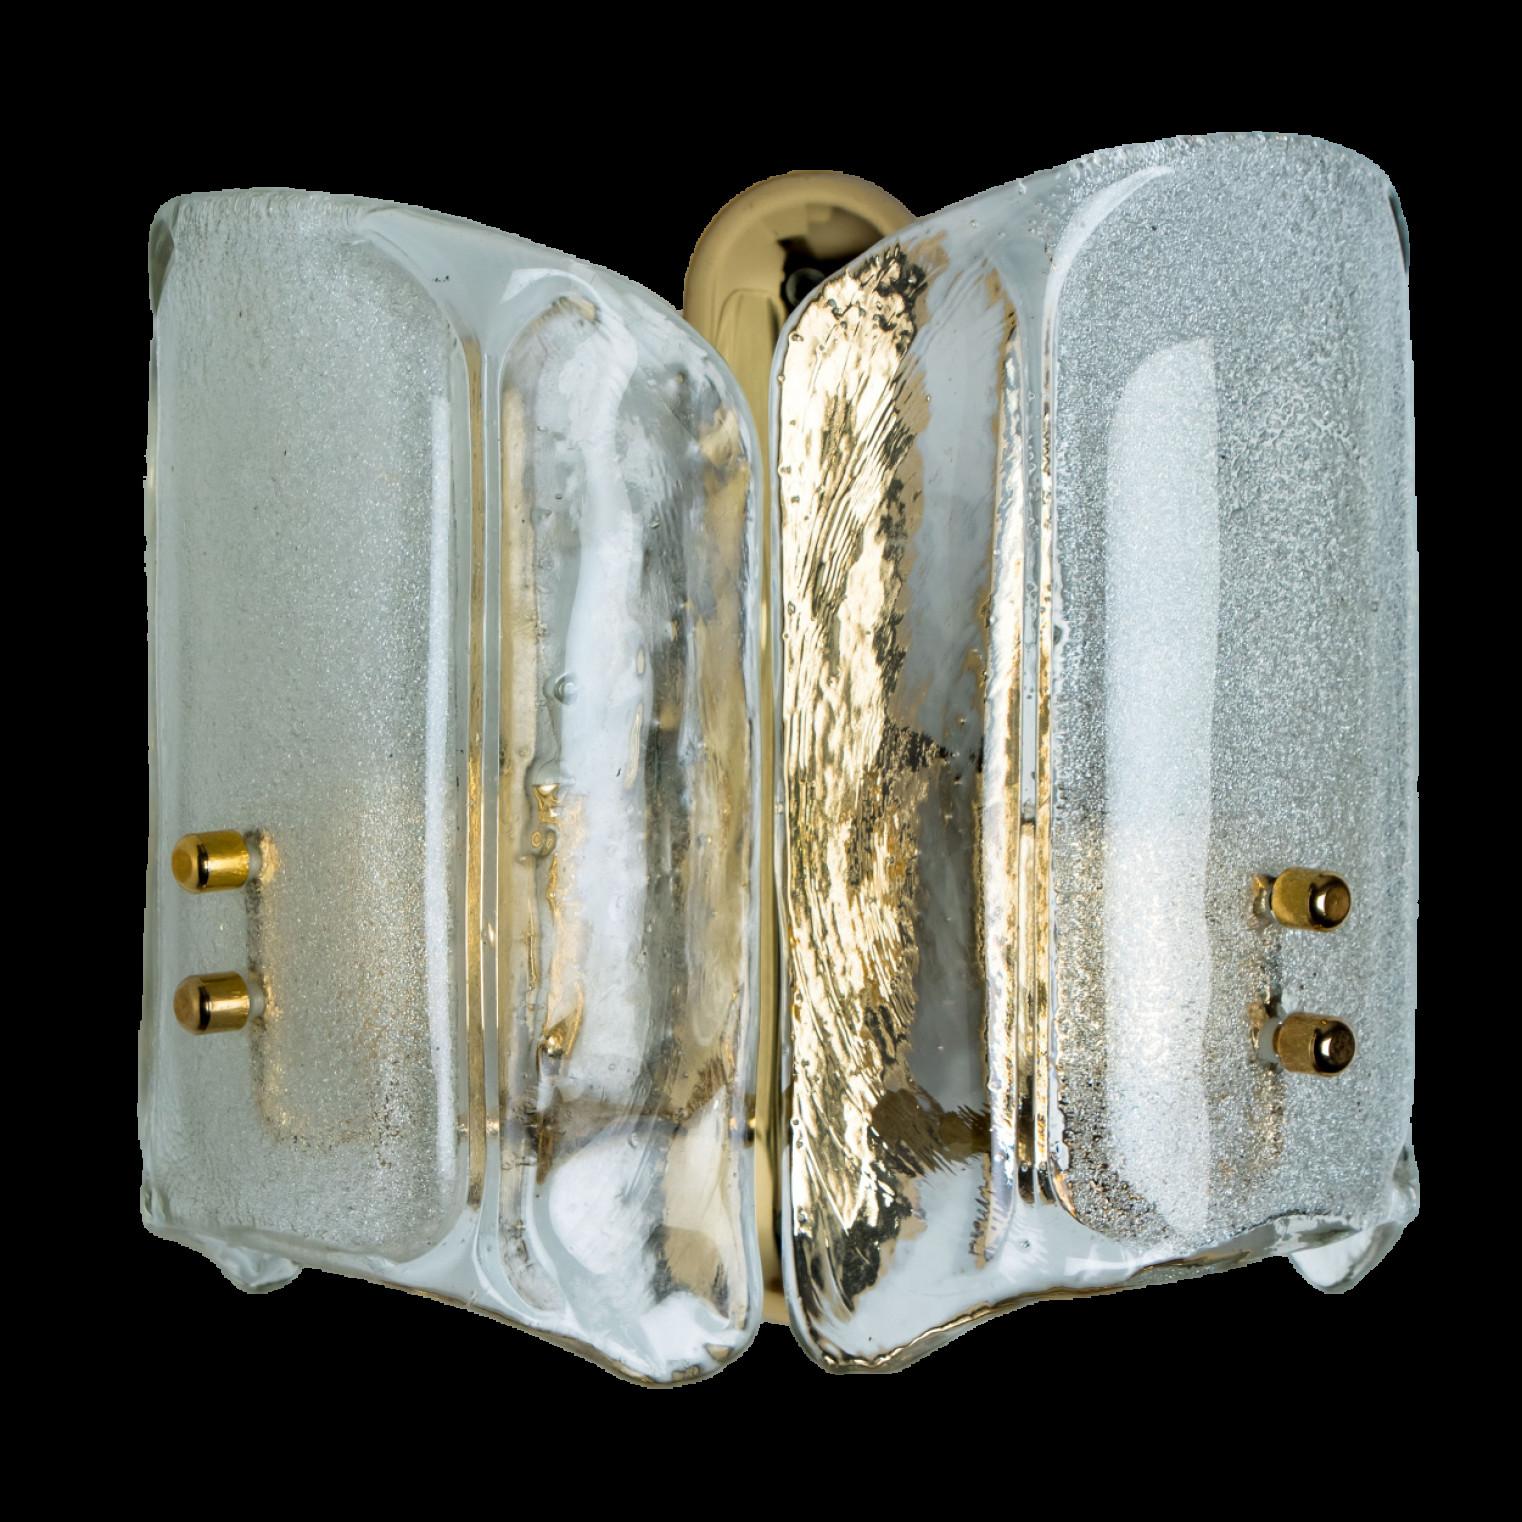 Pair of wall lights were designed in the style of Kalmar, featuring a square brass base and a rectangular glass cover in opal and clear glass.

Dimensions:
Height 9.84